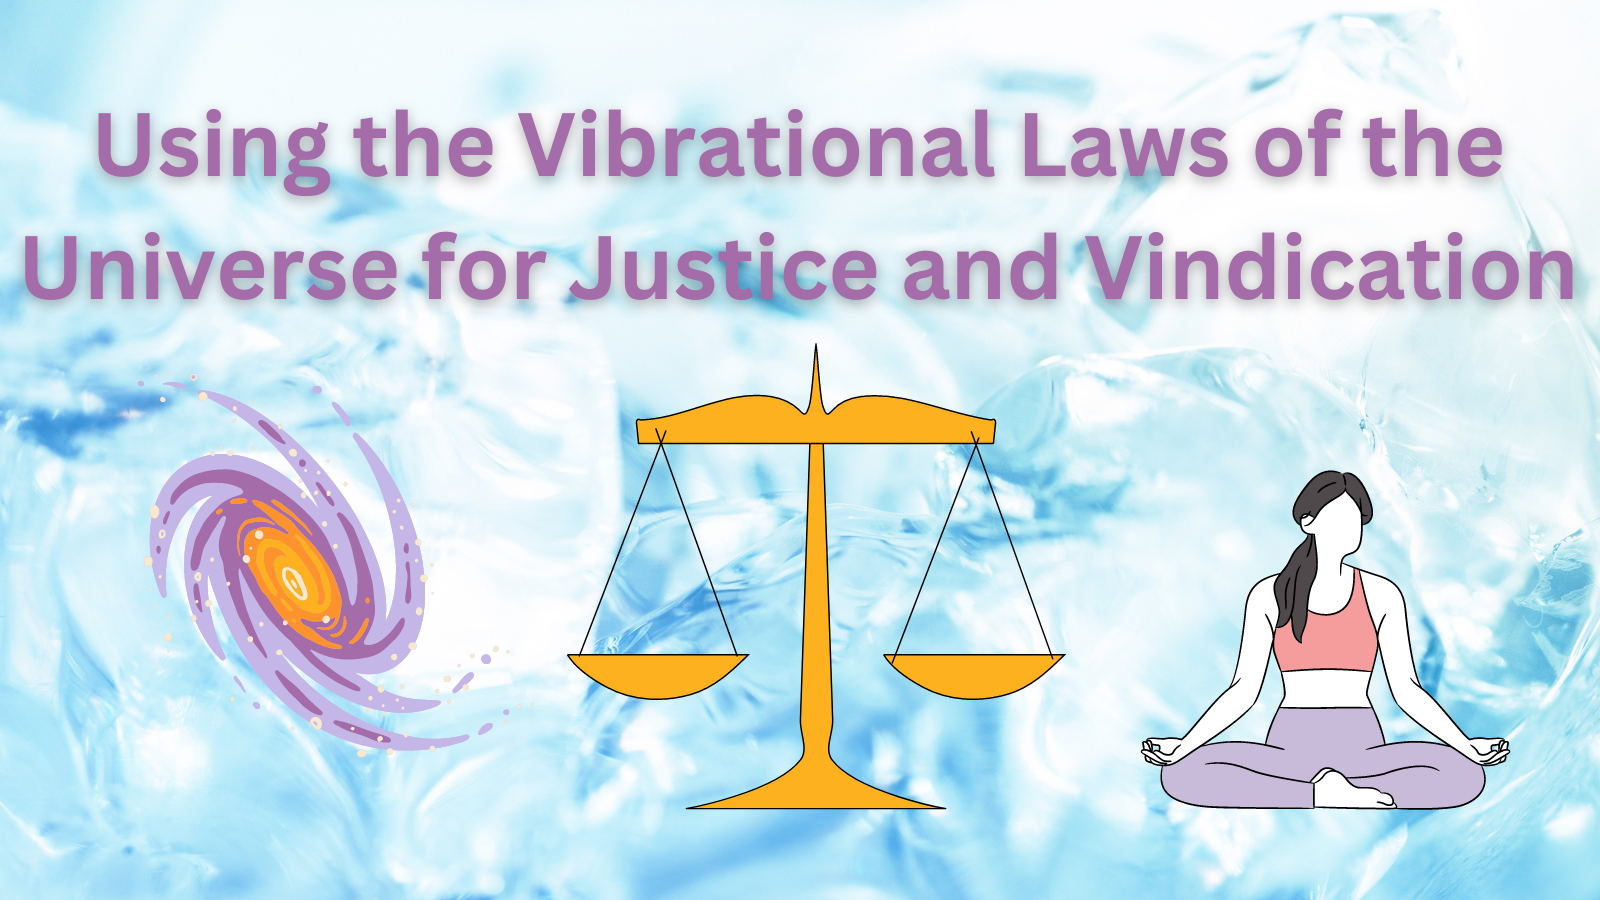 Vibrational Laws of the Universe for Justice and Vindication